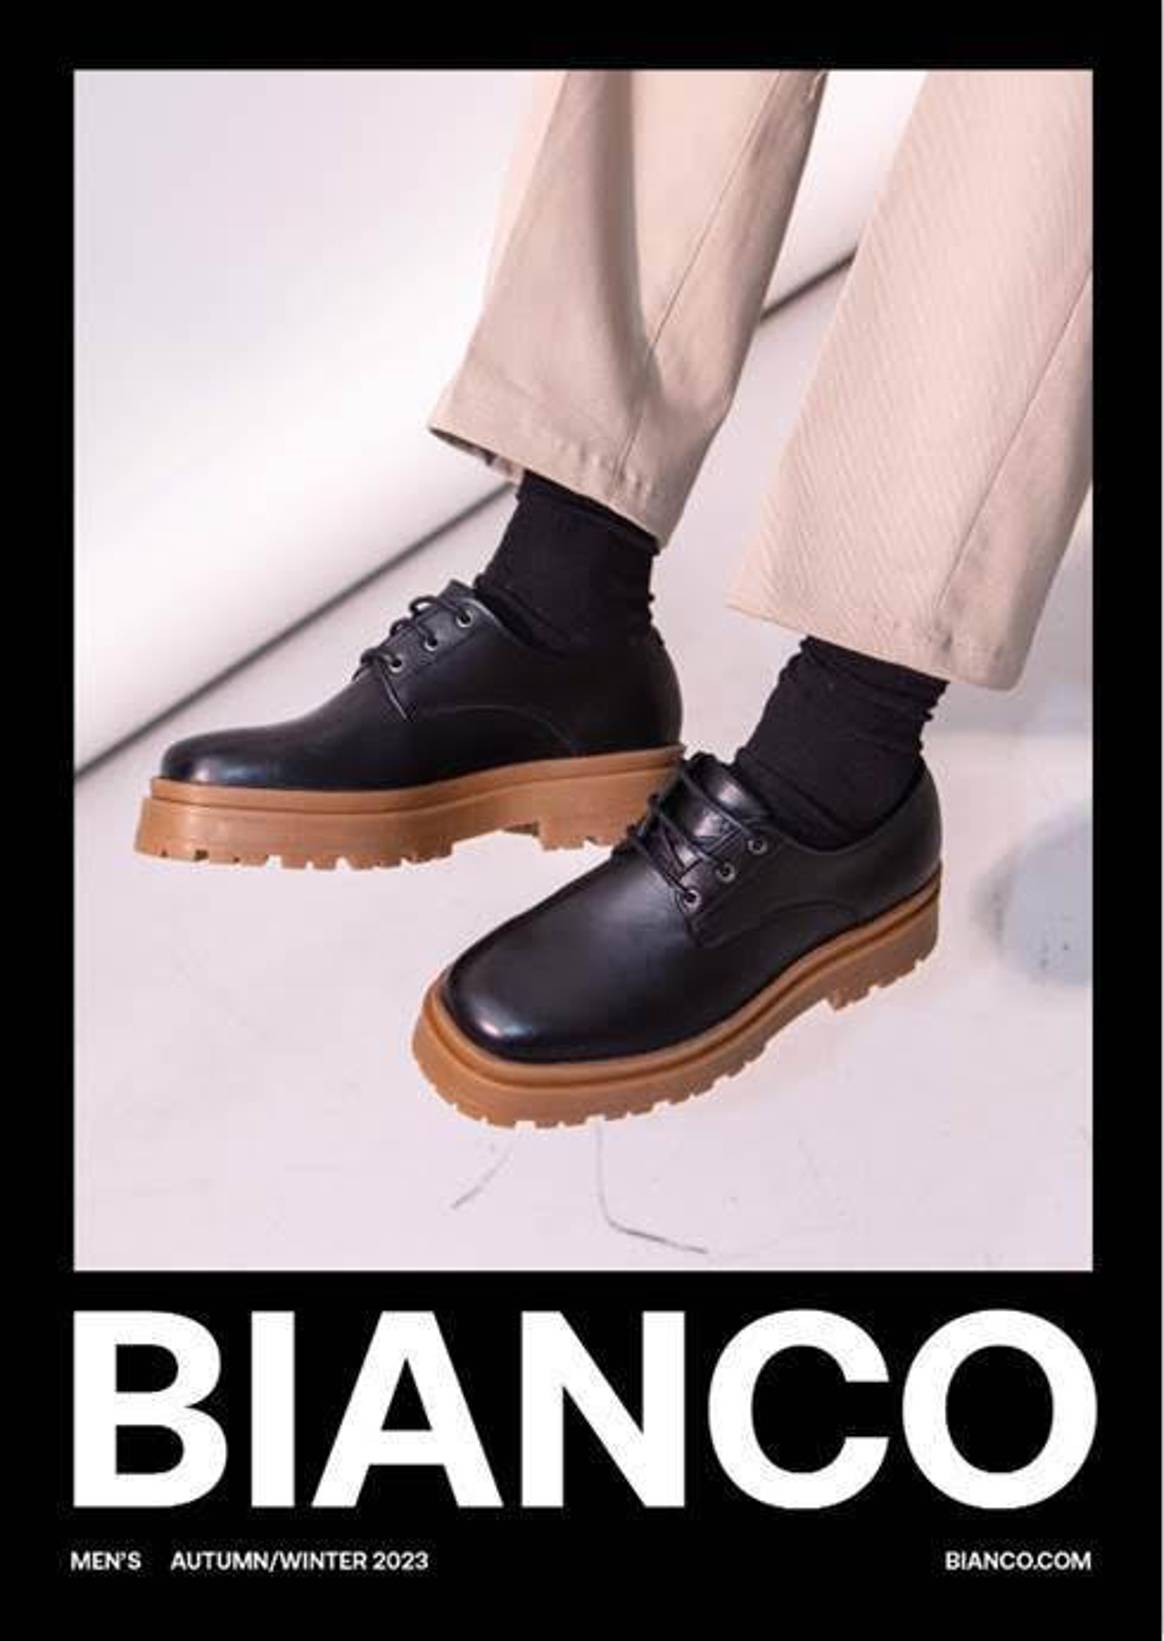 Image: Bianco Footwear, AW23, courtesy of the brand